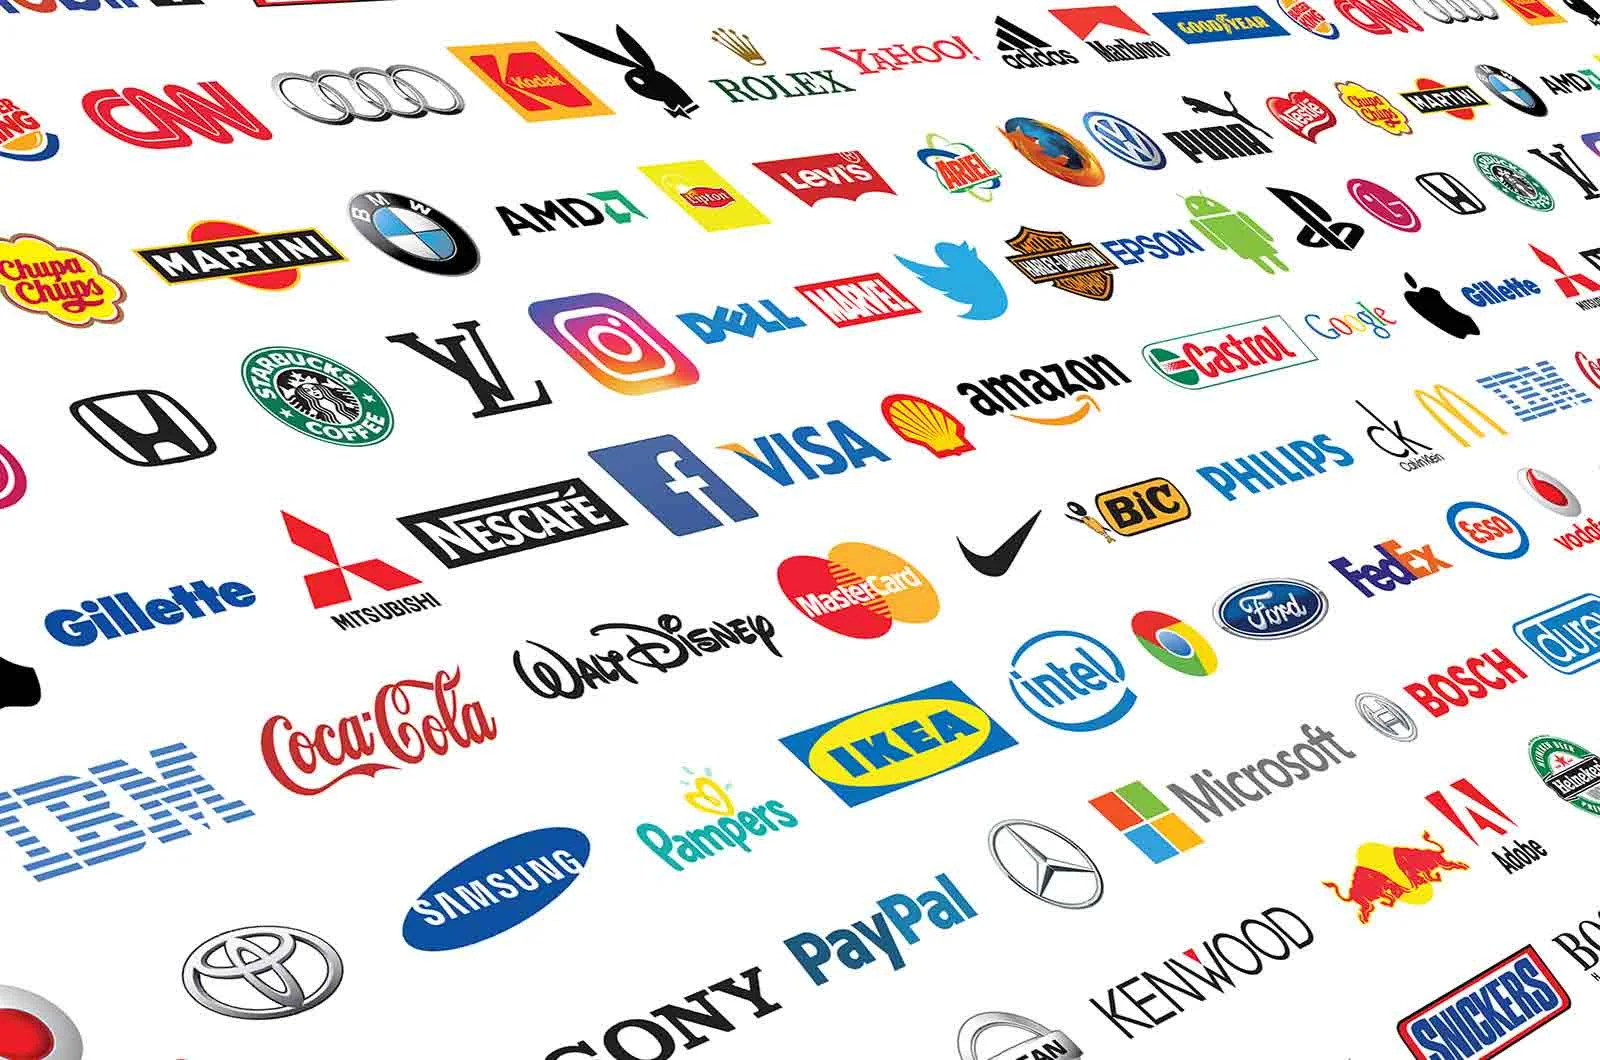 Collection of logos of global brands printed on paper. Concept of brand naming and brand translation.